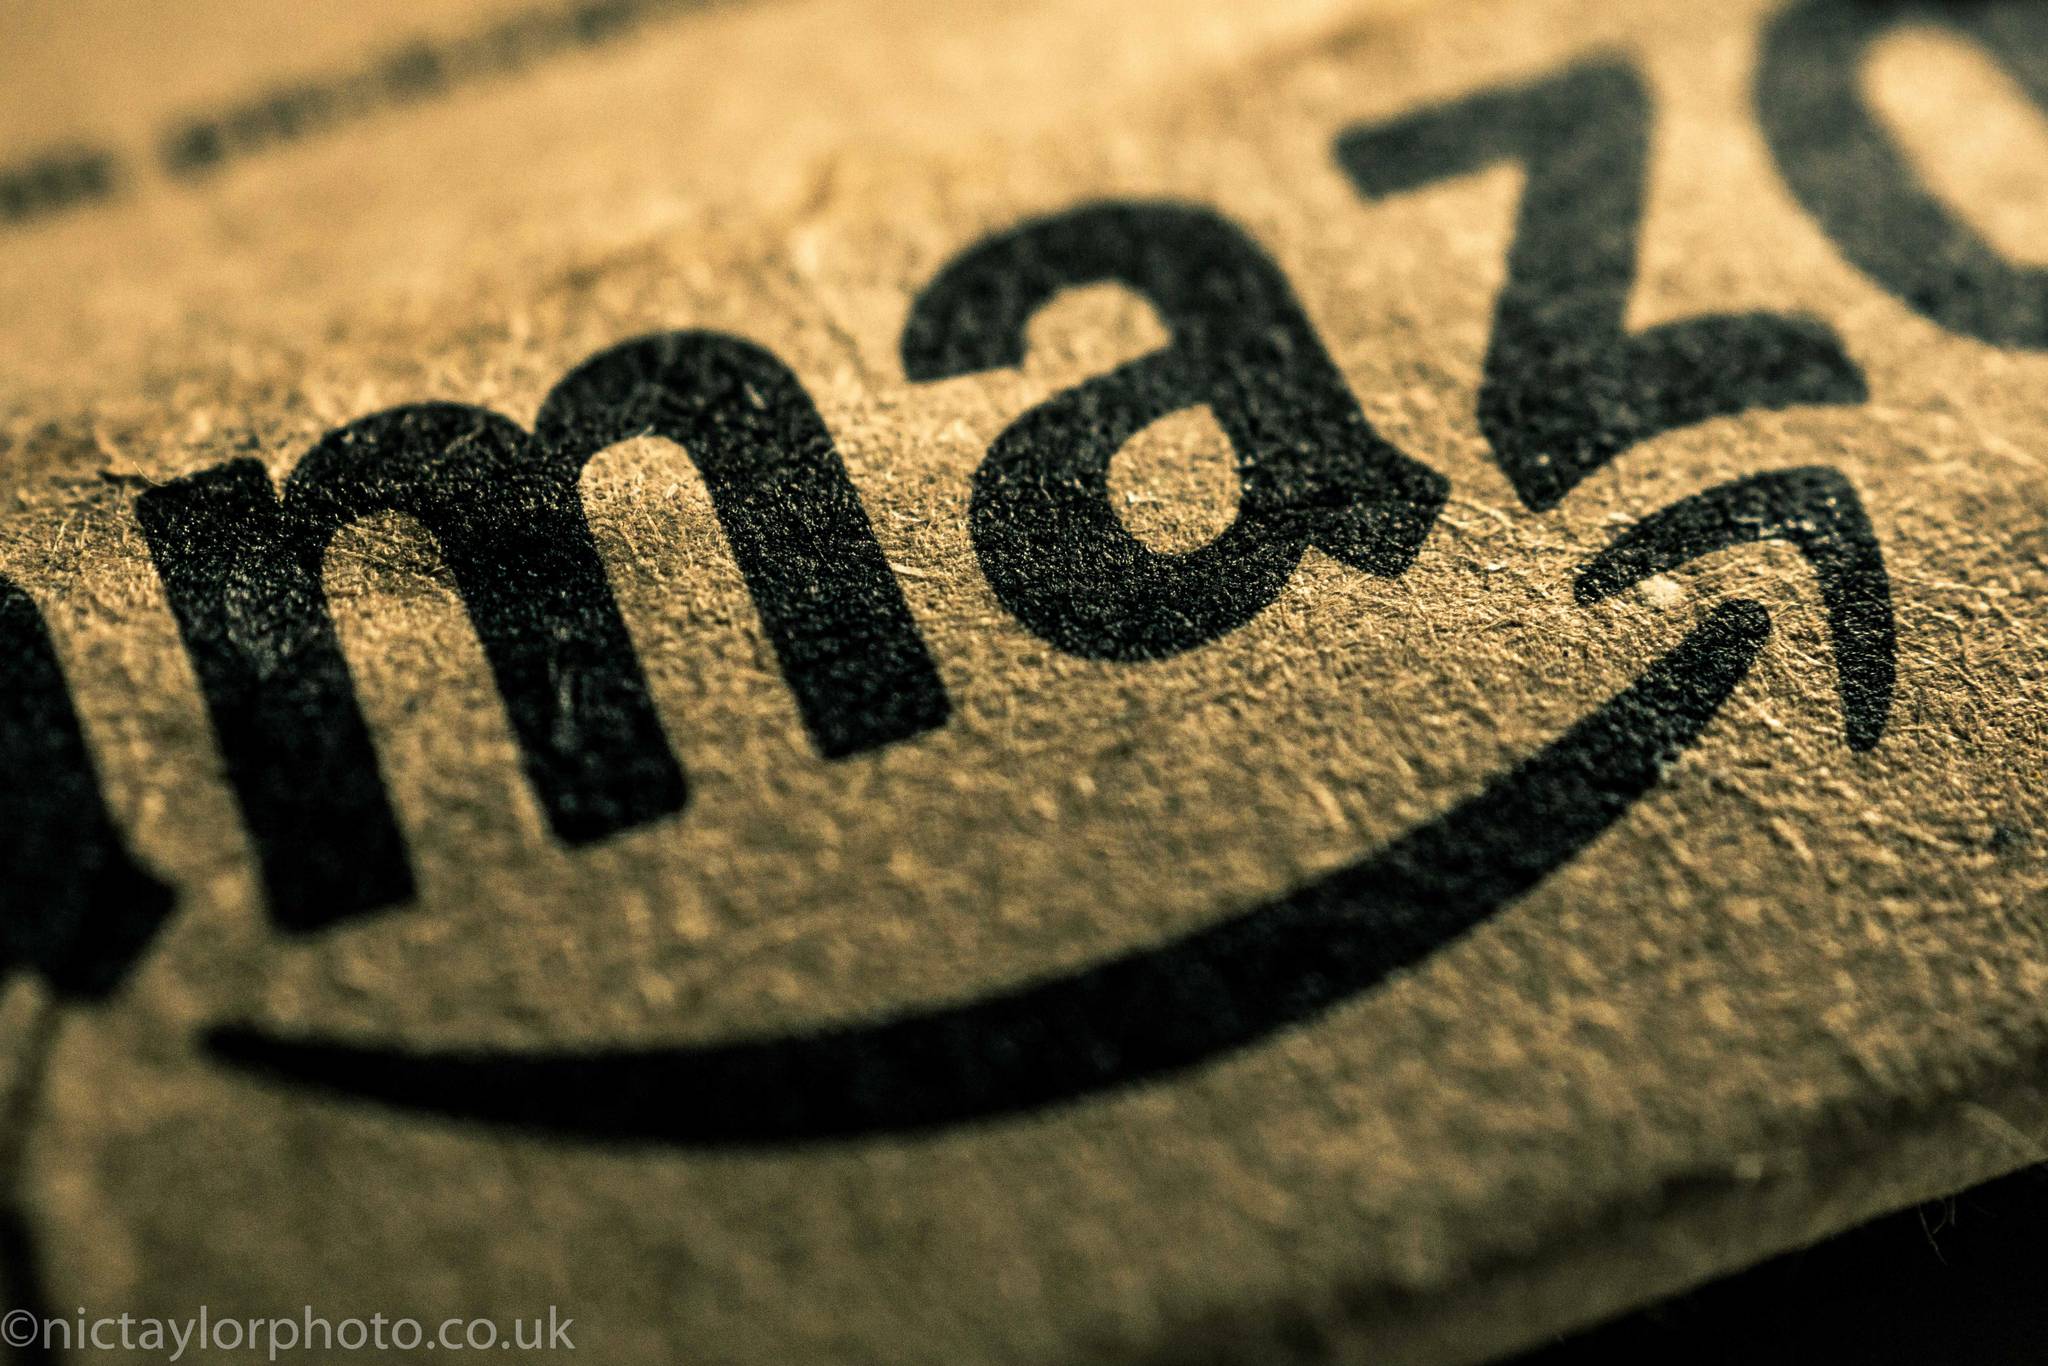 Amazon to offer free same-day delivery